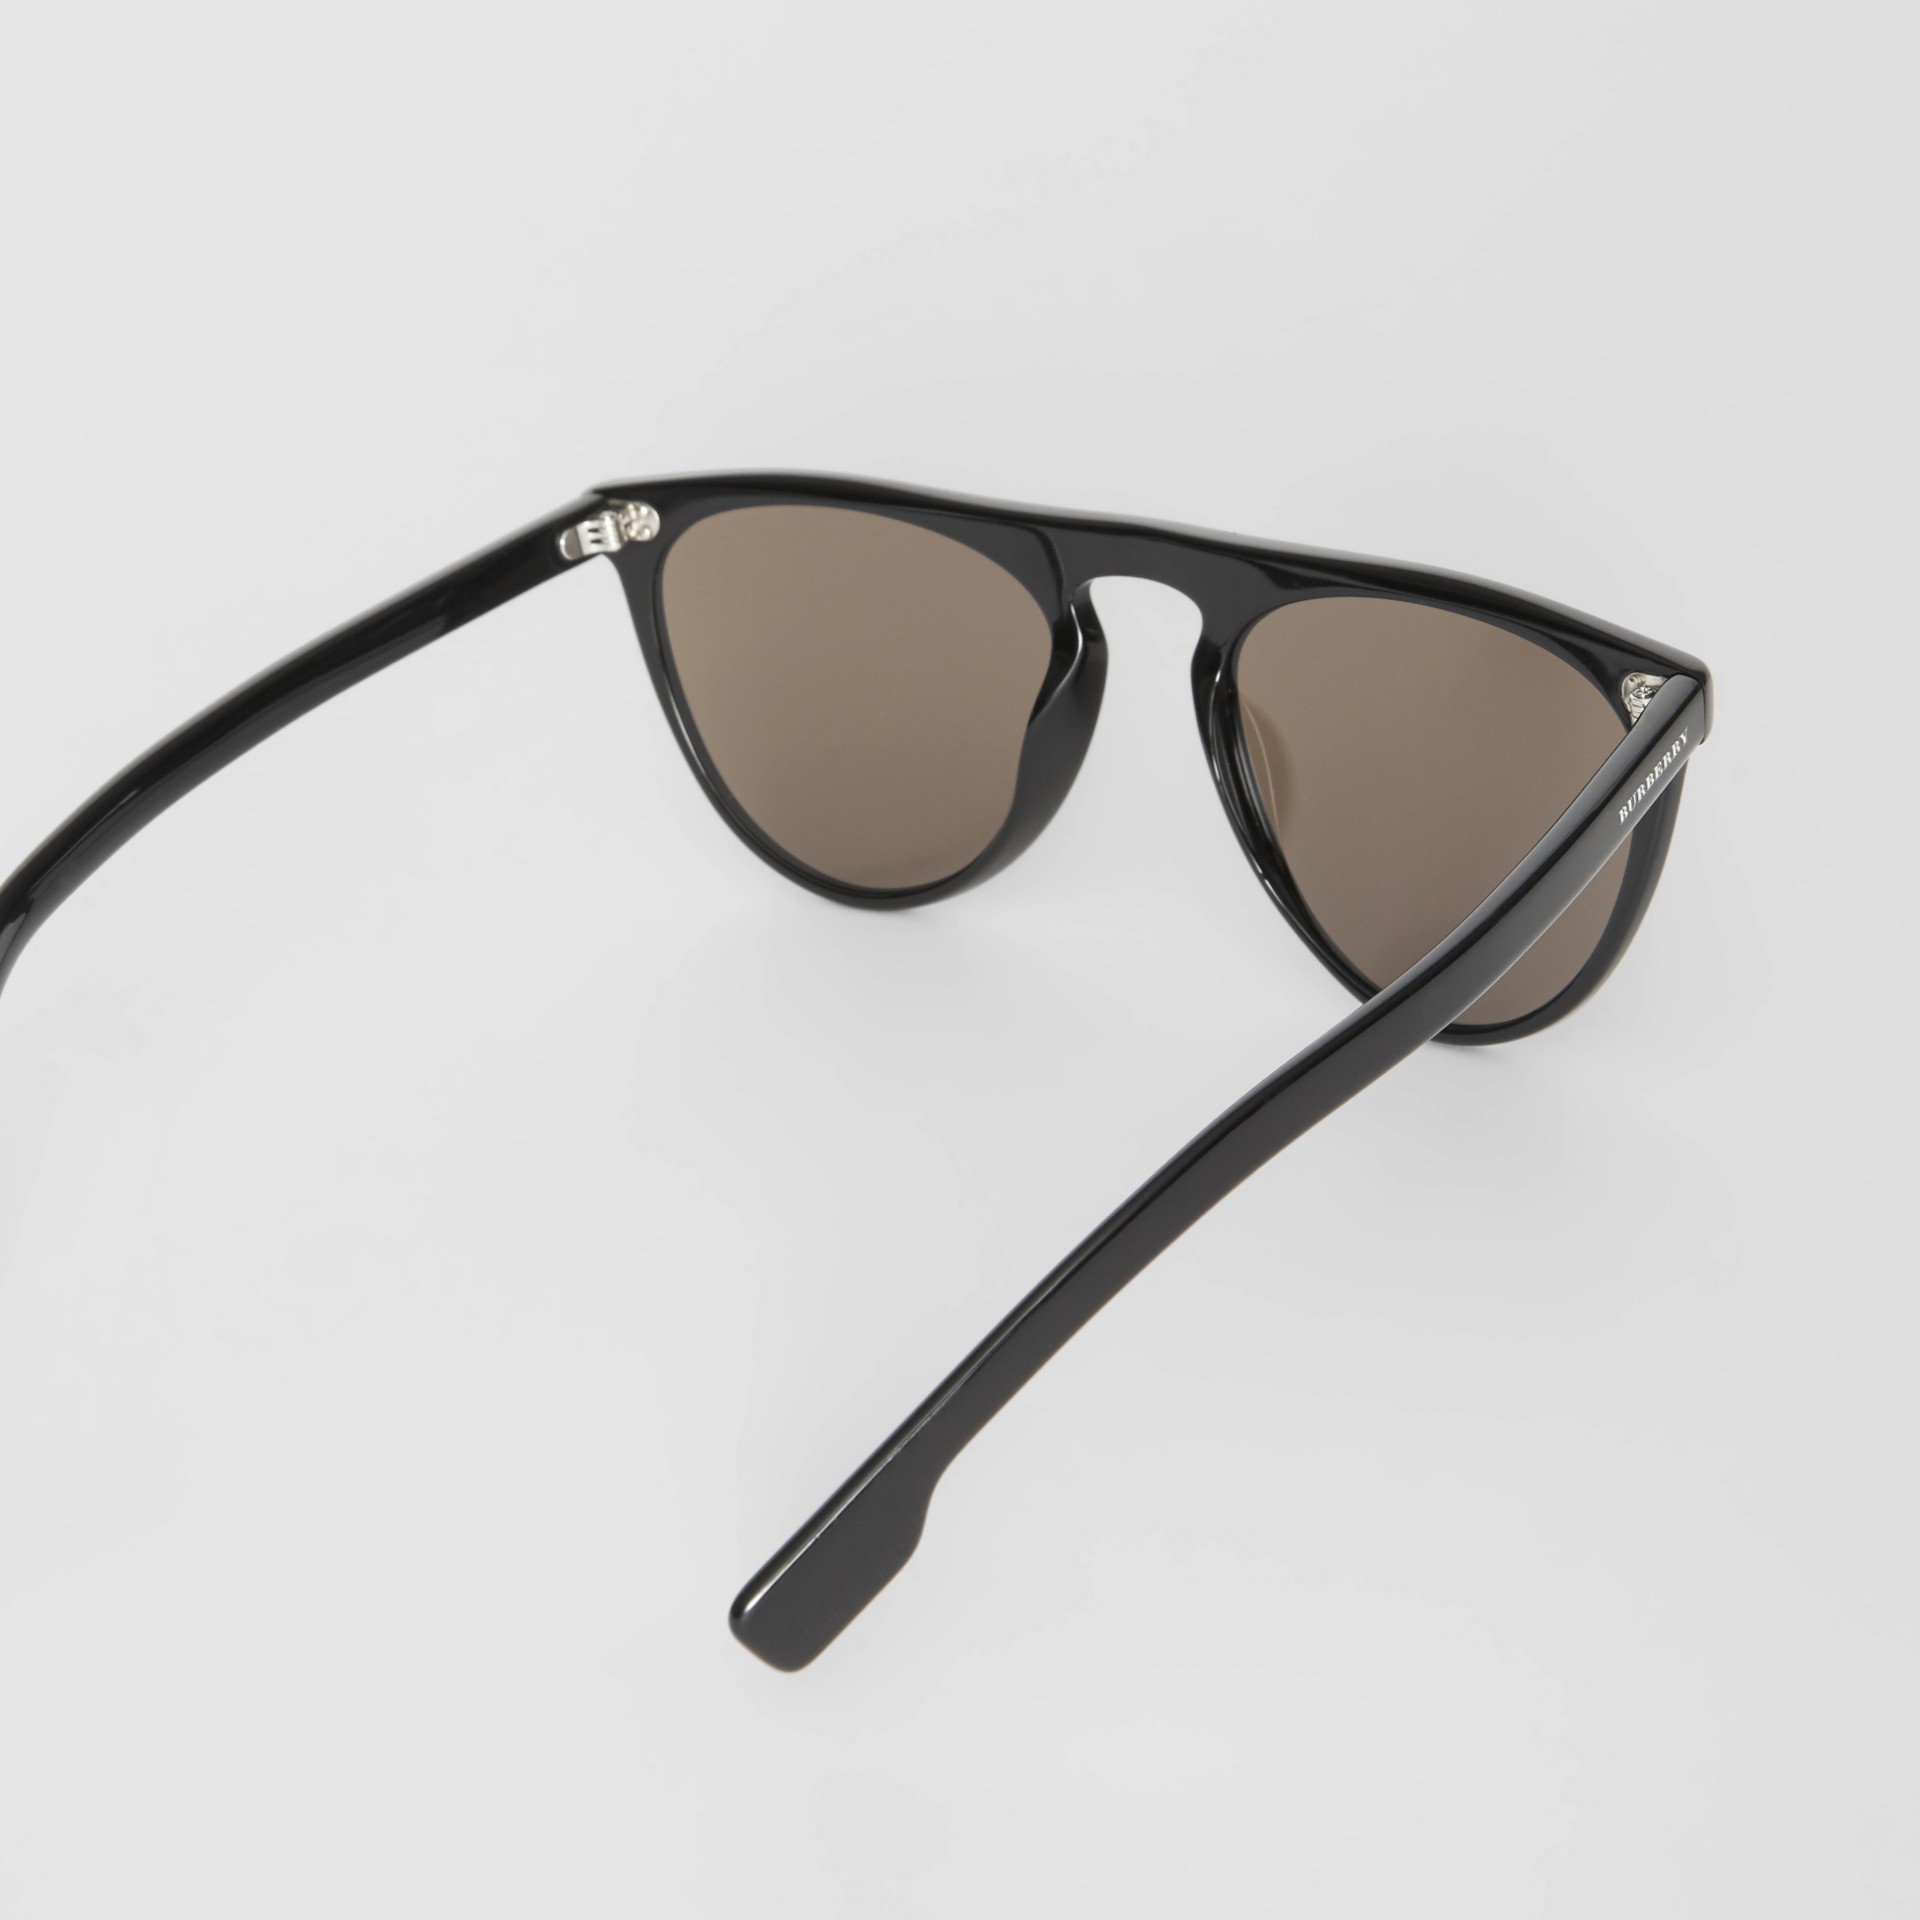 Keyhole D-shaped Sunglasses in Black - Men | Burberry United States